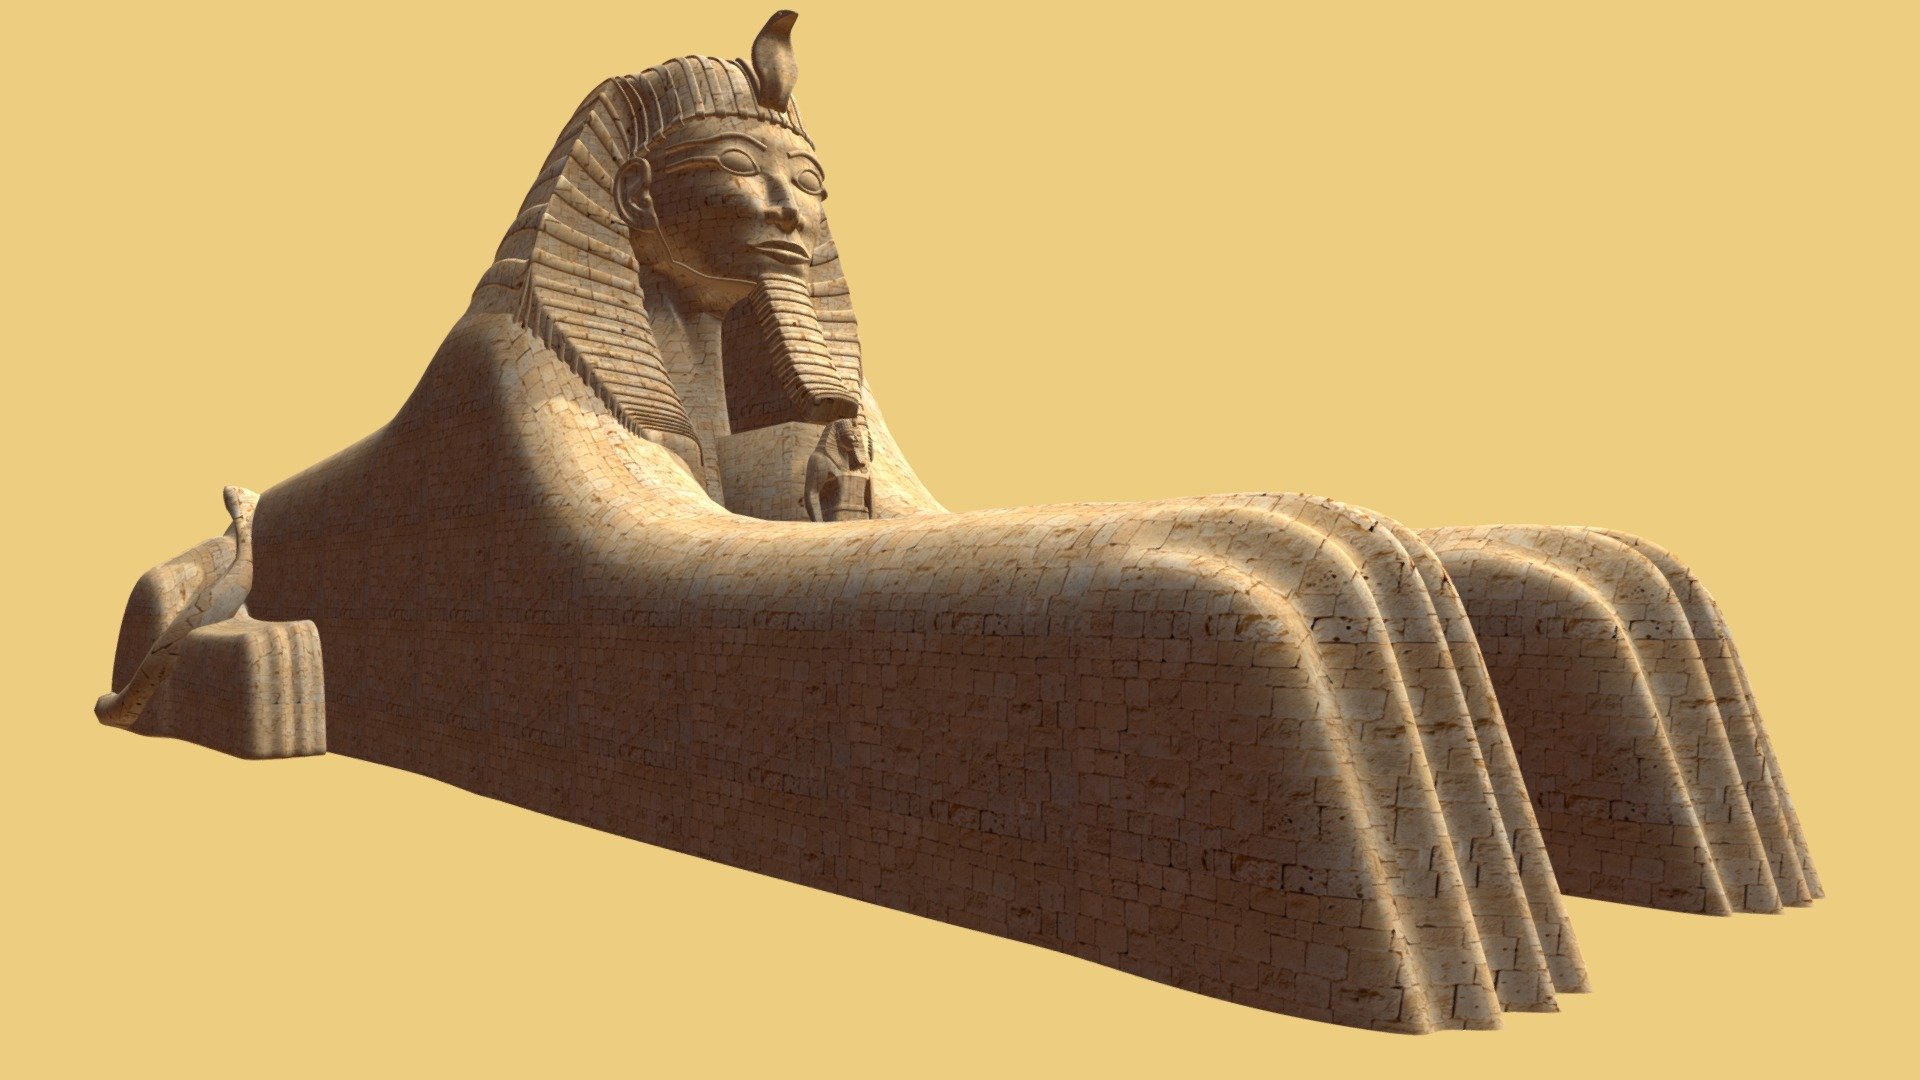 Modeled in 3ds max. Great Giza Sphinx of Egypt. Made with reference to Hatshepsut's sphinx 3d model